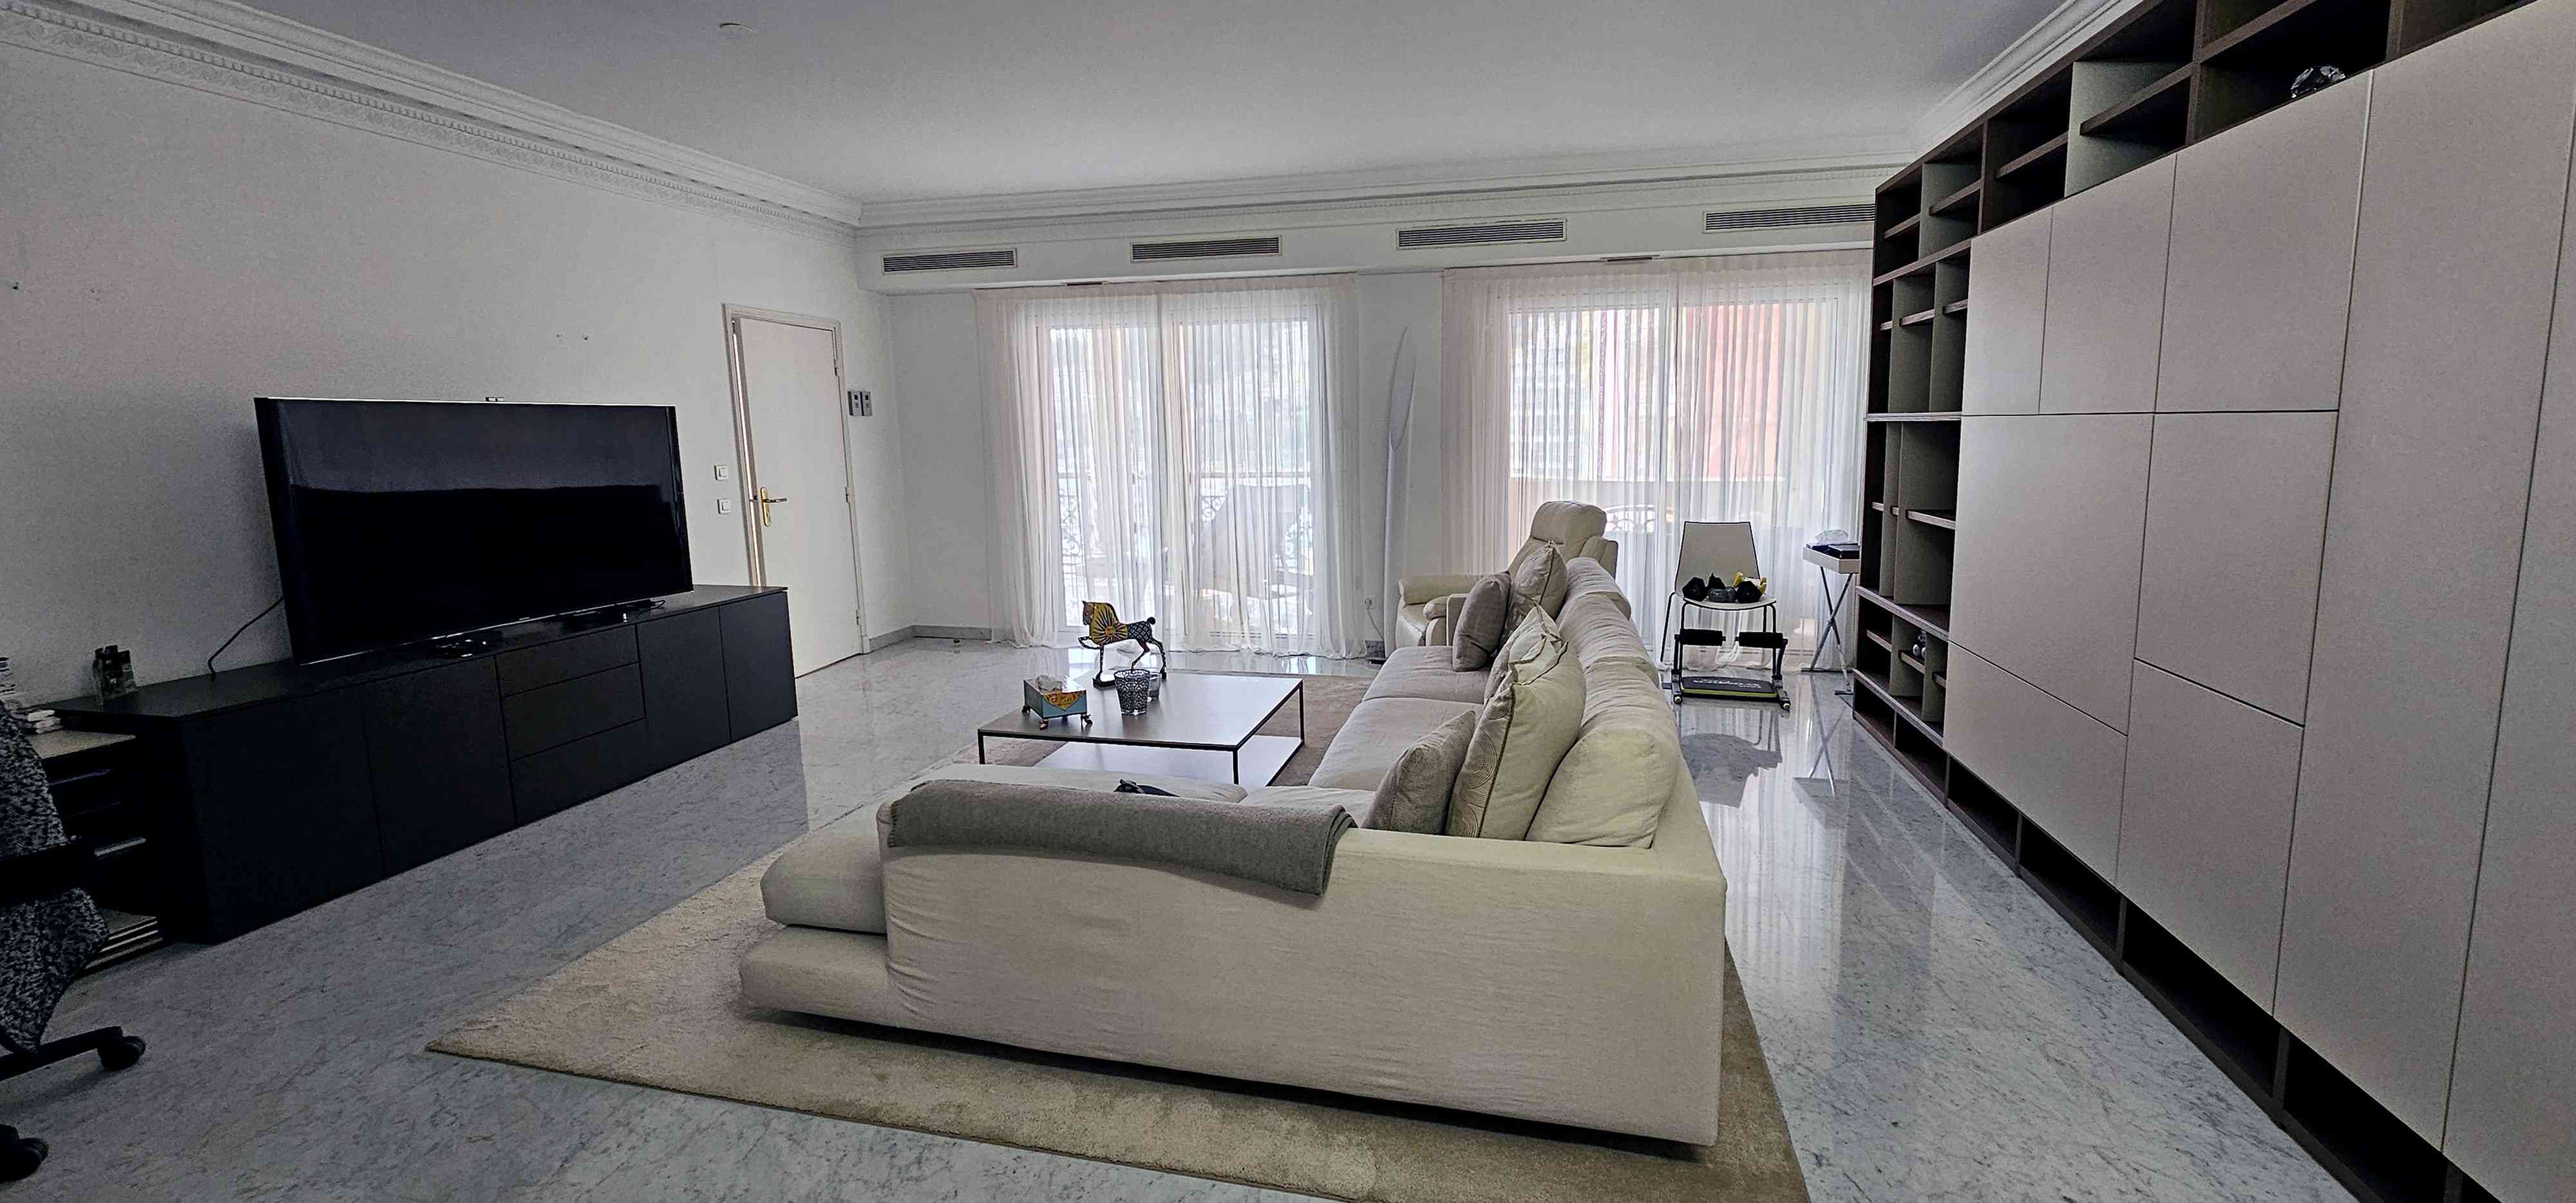                                                                                                                                         3-ROOM APARTMENT OF 178 M²,  LOCATED IN A PRESTIGIOUS RESIDENCE WITH SWIMMING POOL AND SPA                                                                    
                                                             